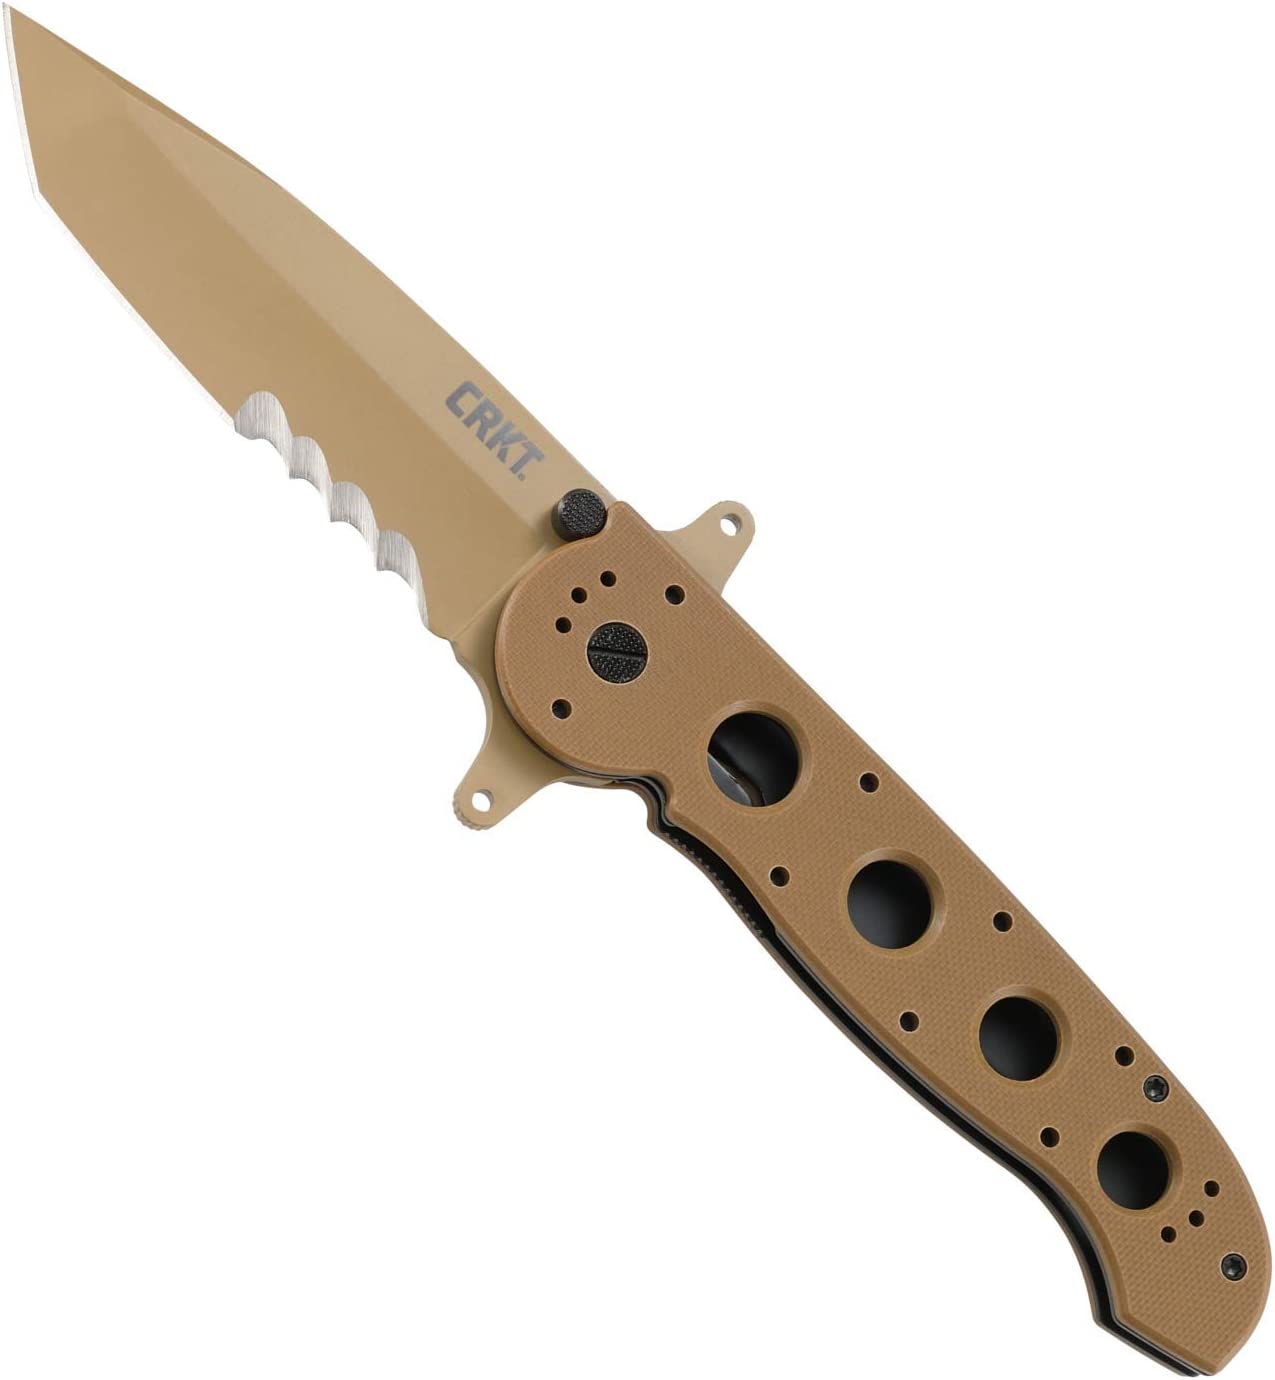 CRKT M16-14DSFG EDC Folding Pocket Knife: Special Forces Everyday Carry, Tan Serrated Edge Blade, Tanto, Automated Liner Safety, Dual Hilt, Desert G10 Handle, 4-Position Pocket Clip